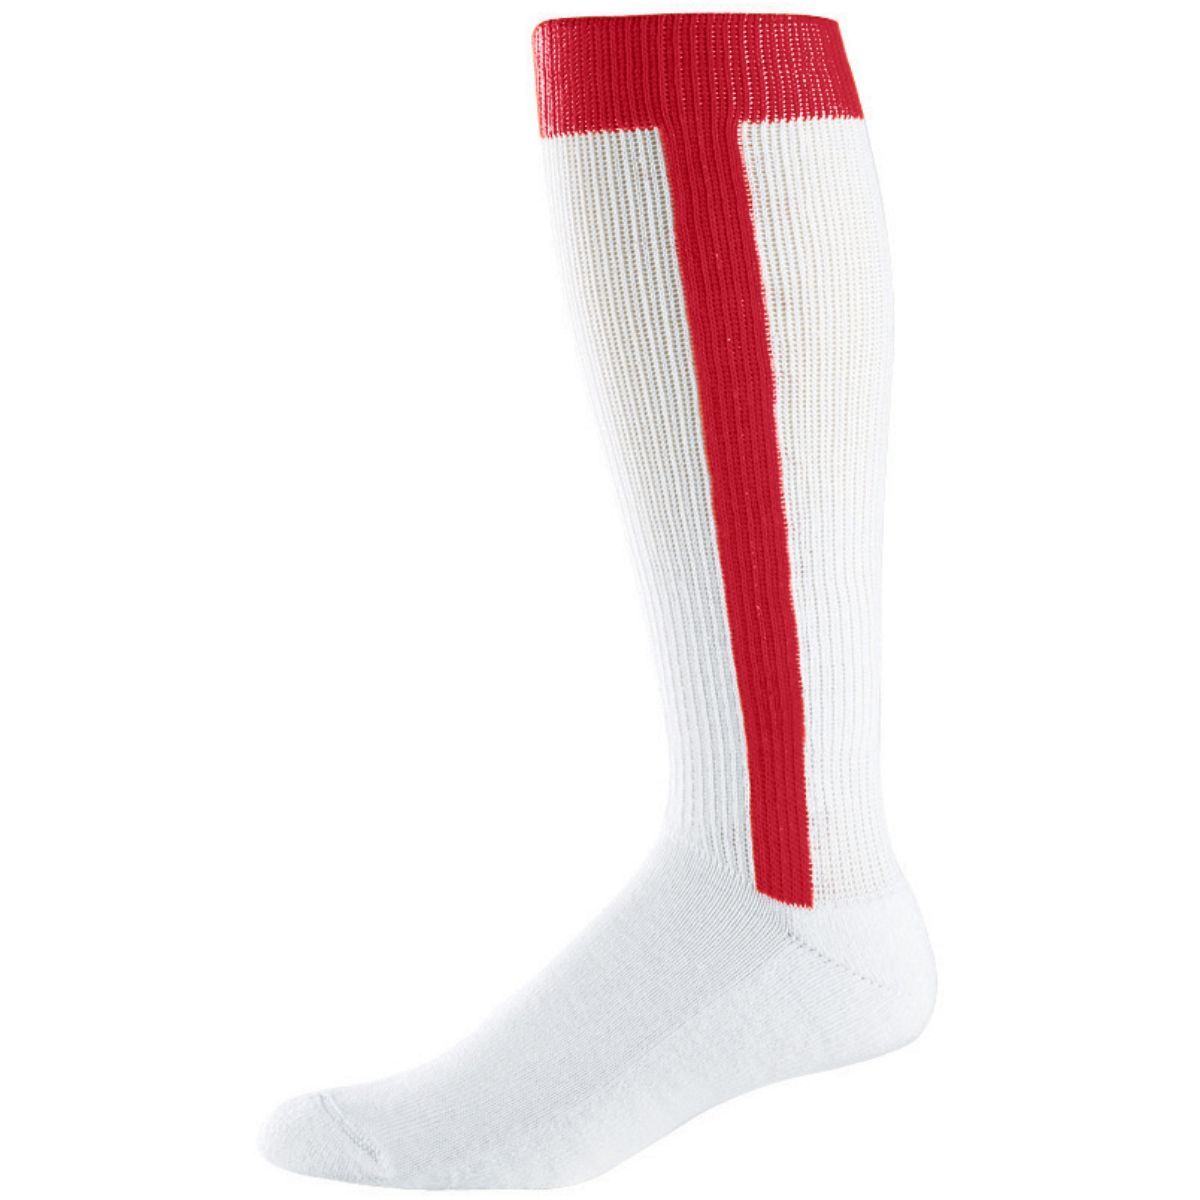 Augusta Sportswear Baseball Stirrup Sock in Red  -Part of the Accessories, Augusta-Products, Accessories-Socks, Baseball, All-Sports, All-Sports-1 product lines at KanaleyCreations.com